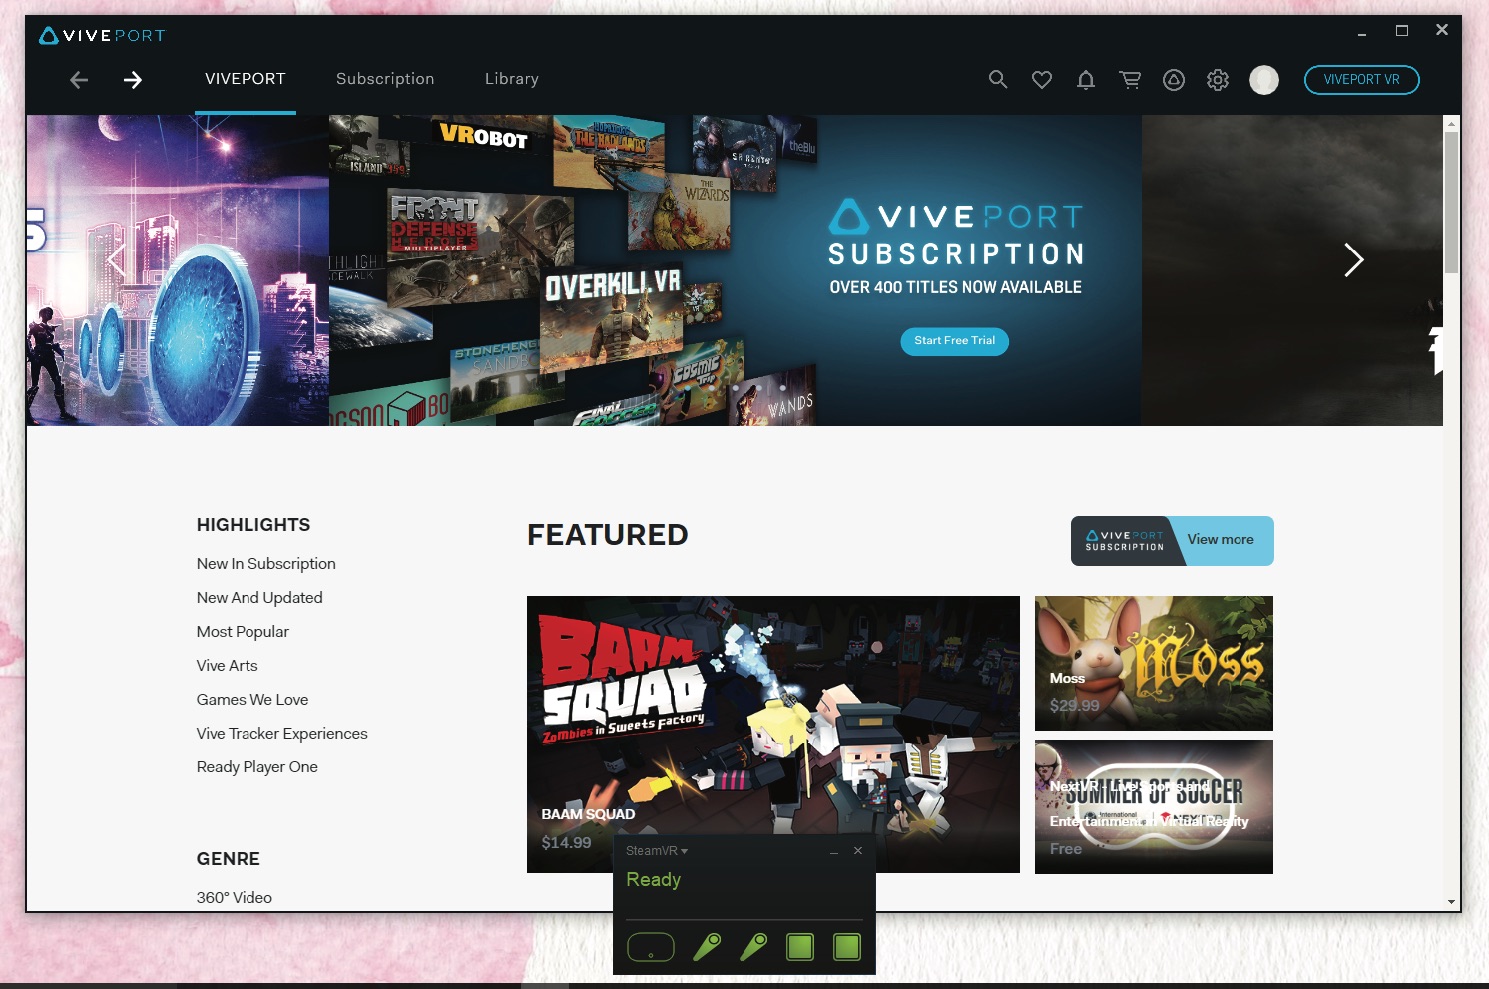 Viveport app showing advertisement for Viveport subscription,featured games and highlight links